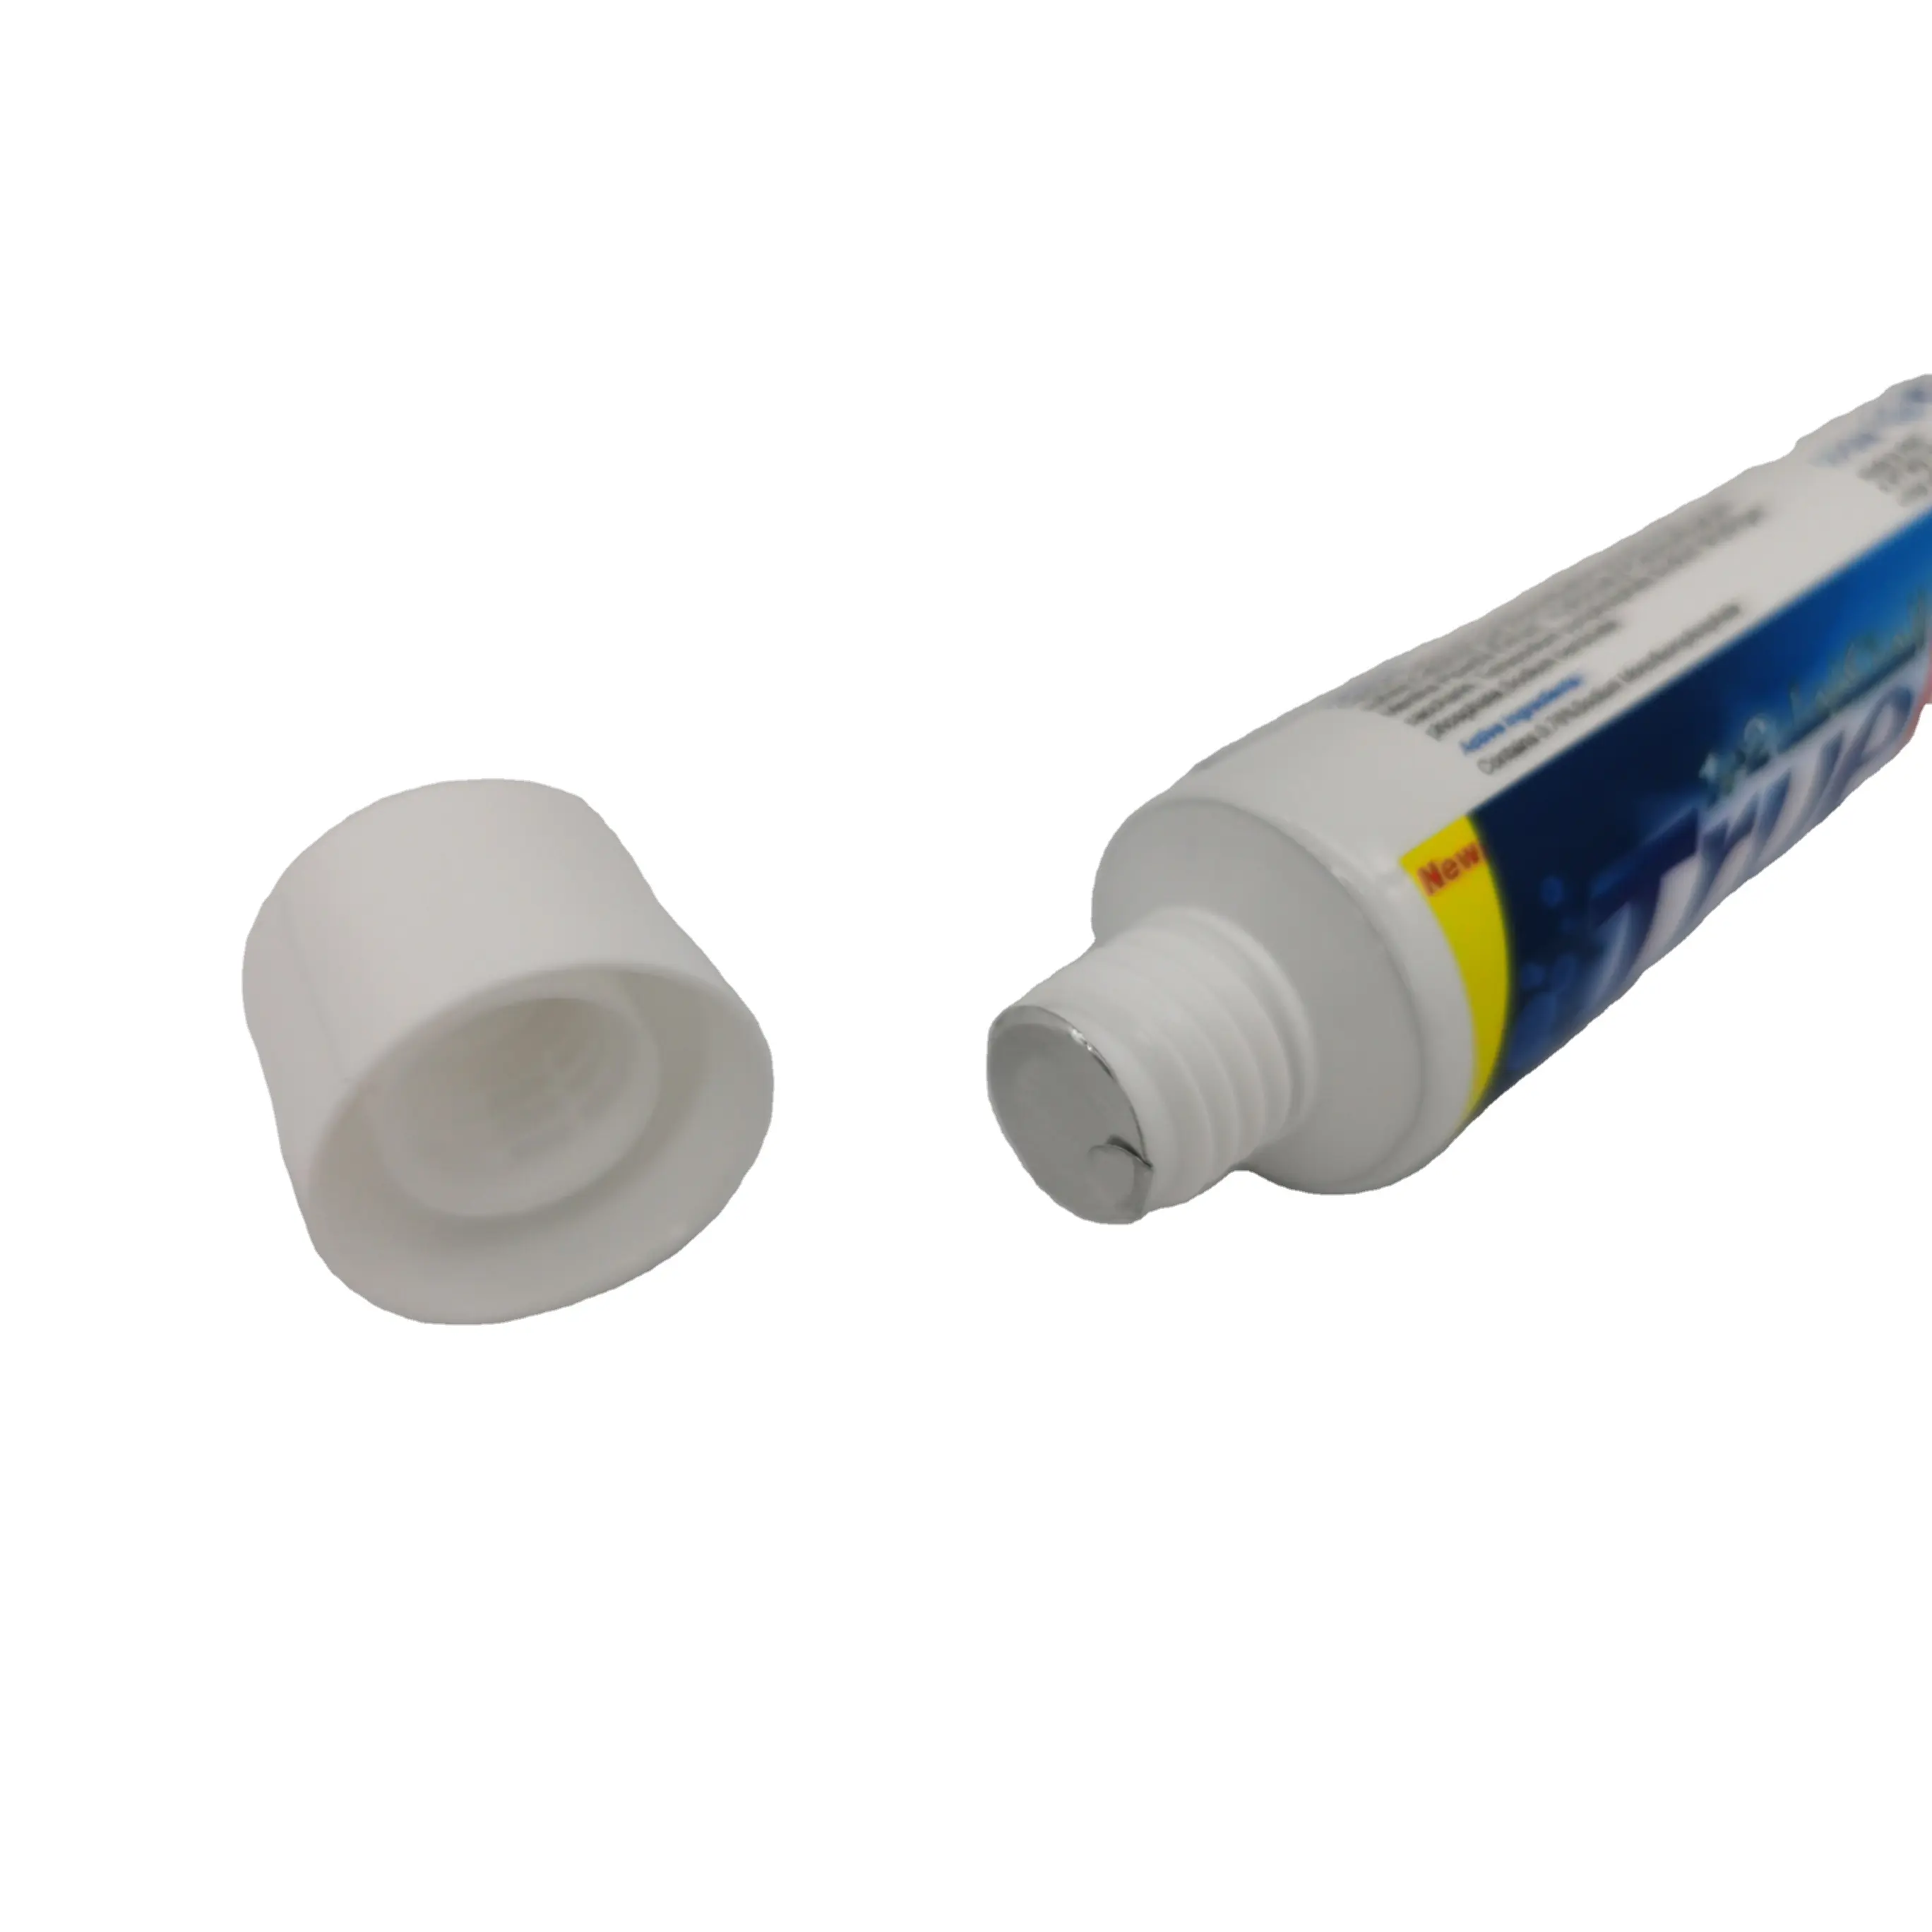 Toothpaste Tube Plastic Laminated Small Tubes Packaging 180g 200g Empty Aluminum TOOTHPASTE Offset Printing